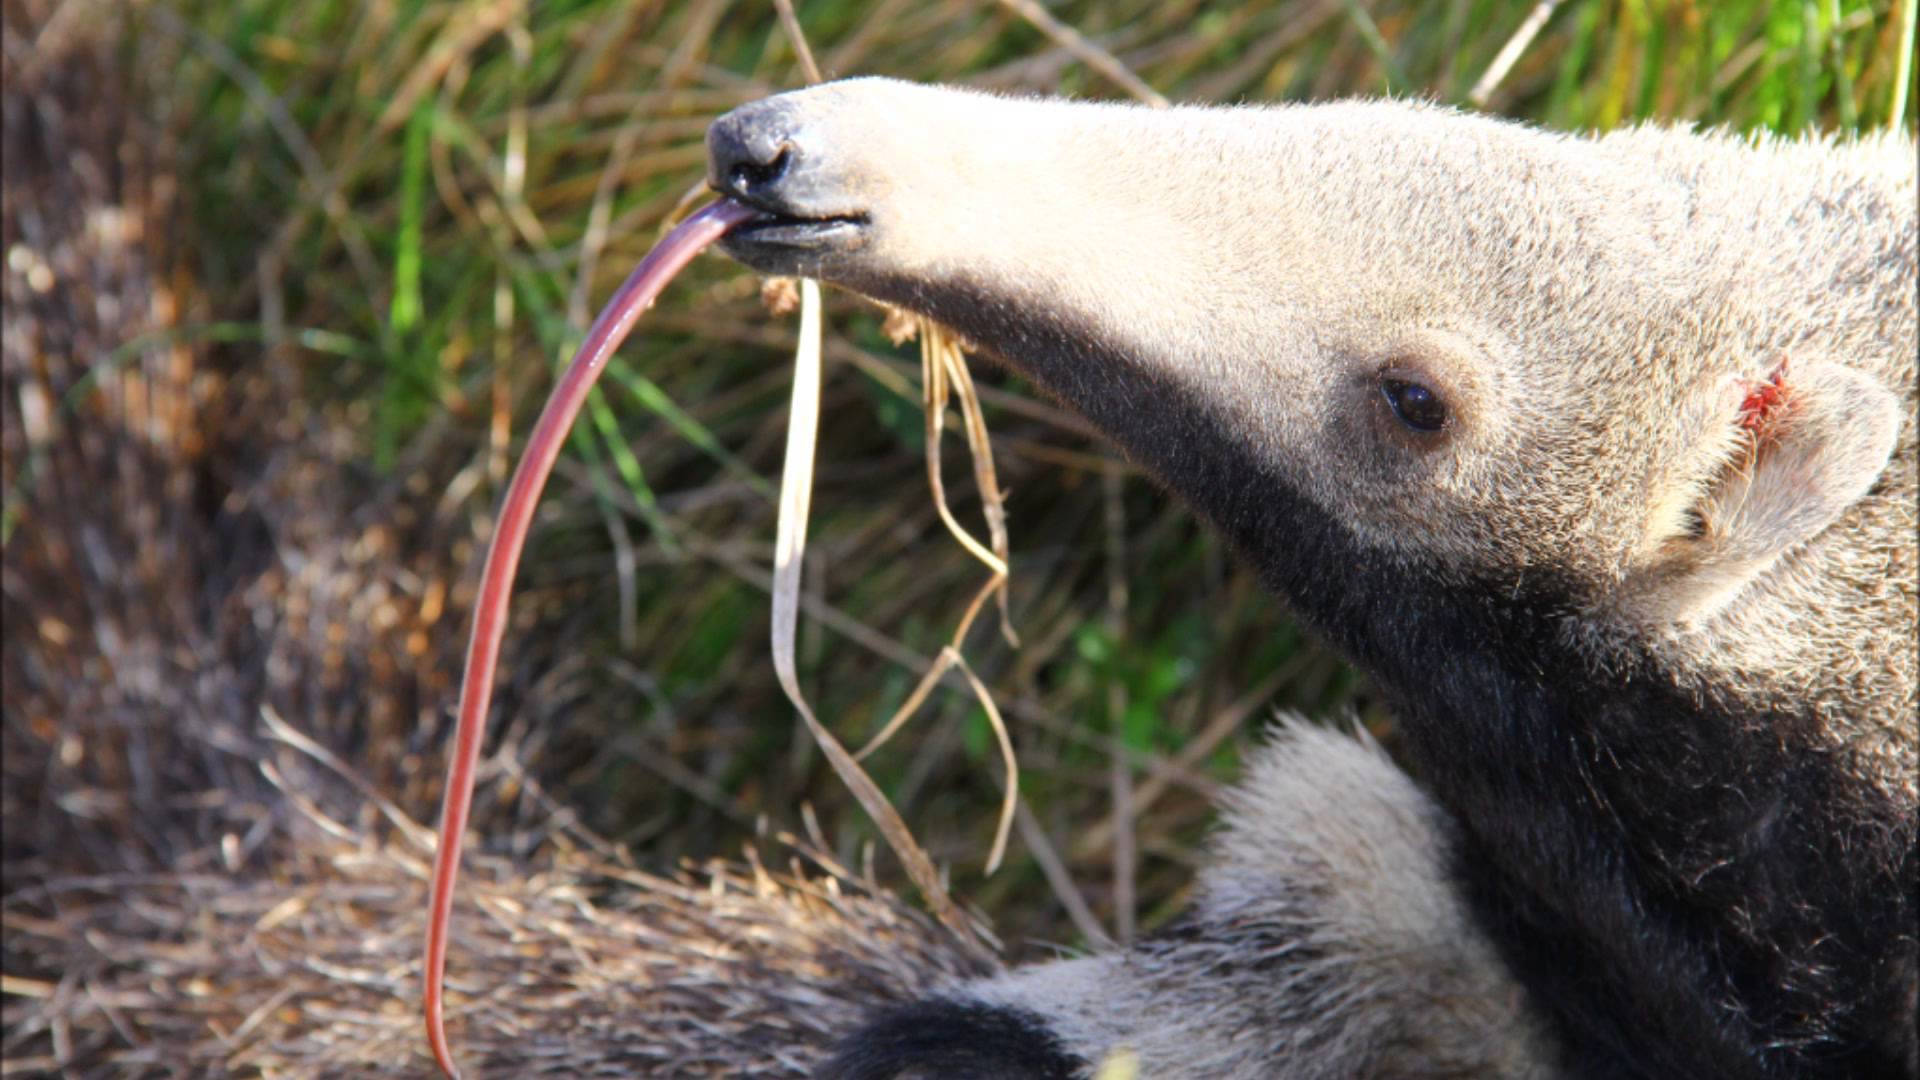 The anteaters